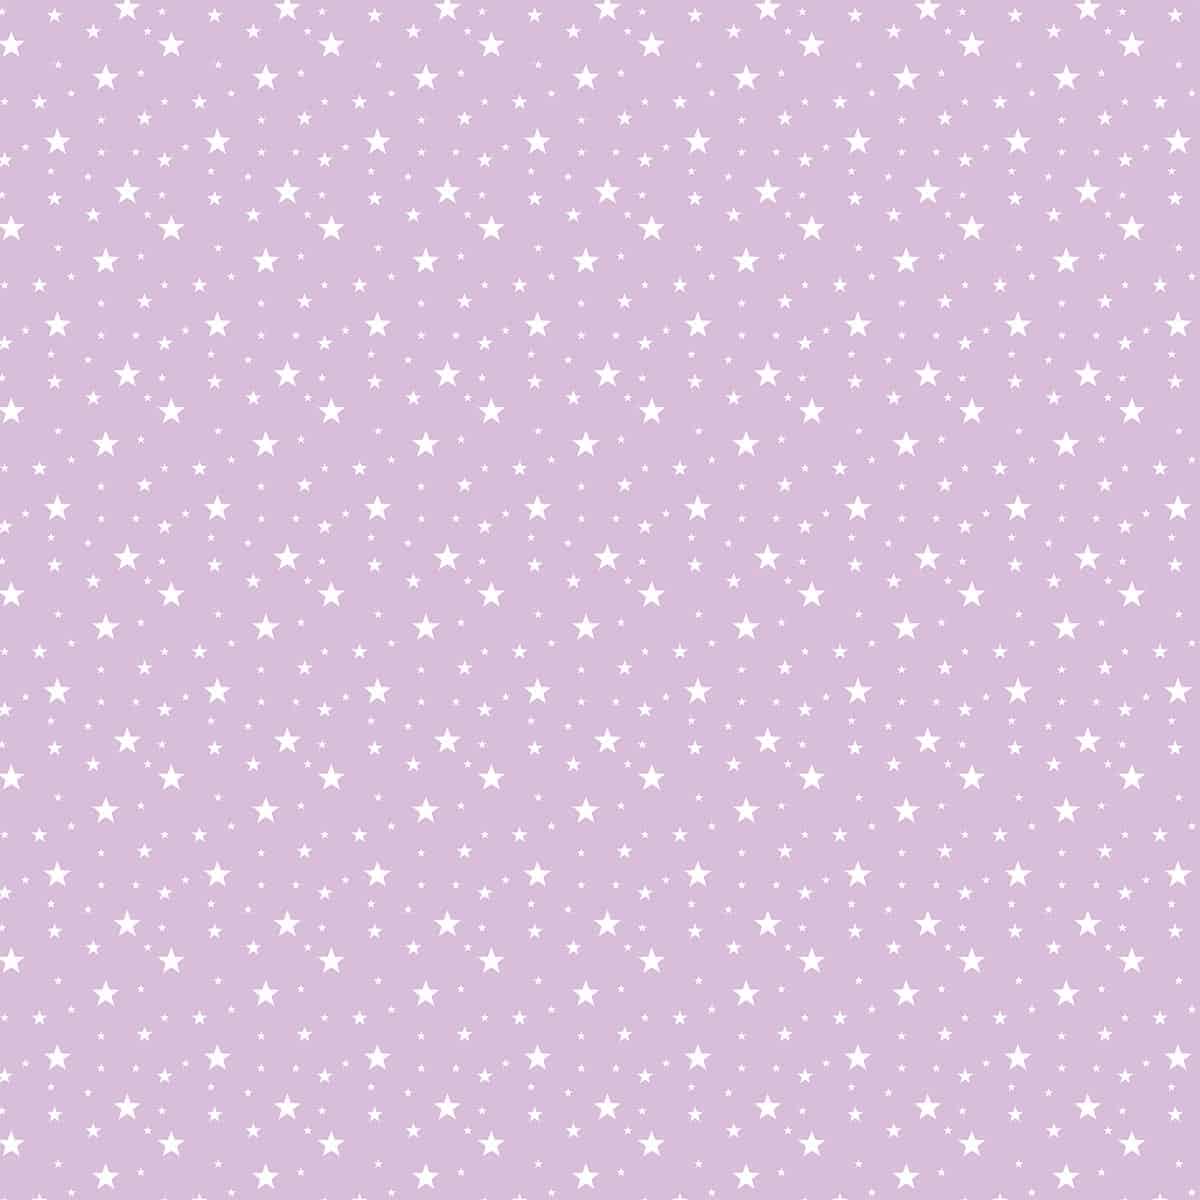 Dreams Under the Stars: Seamless Repeat Pattern for Kids Room, Lilac